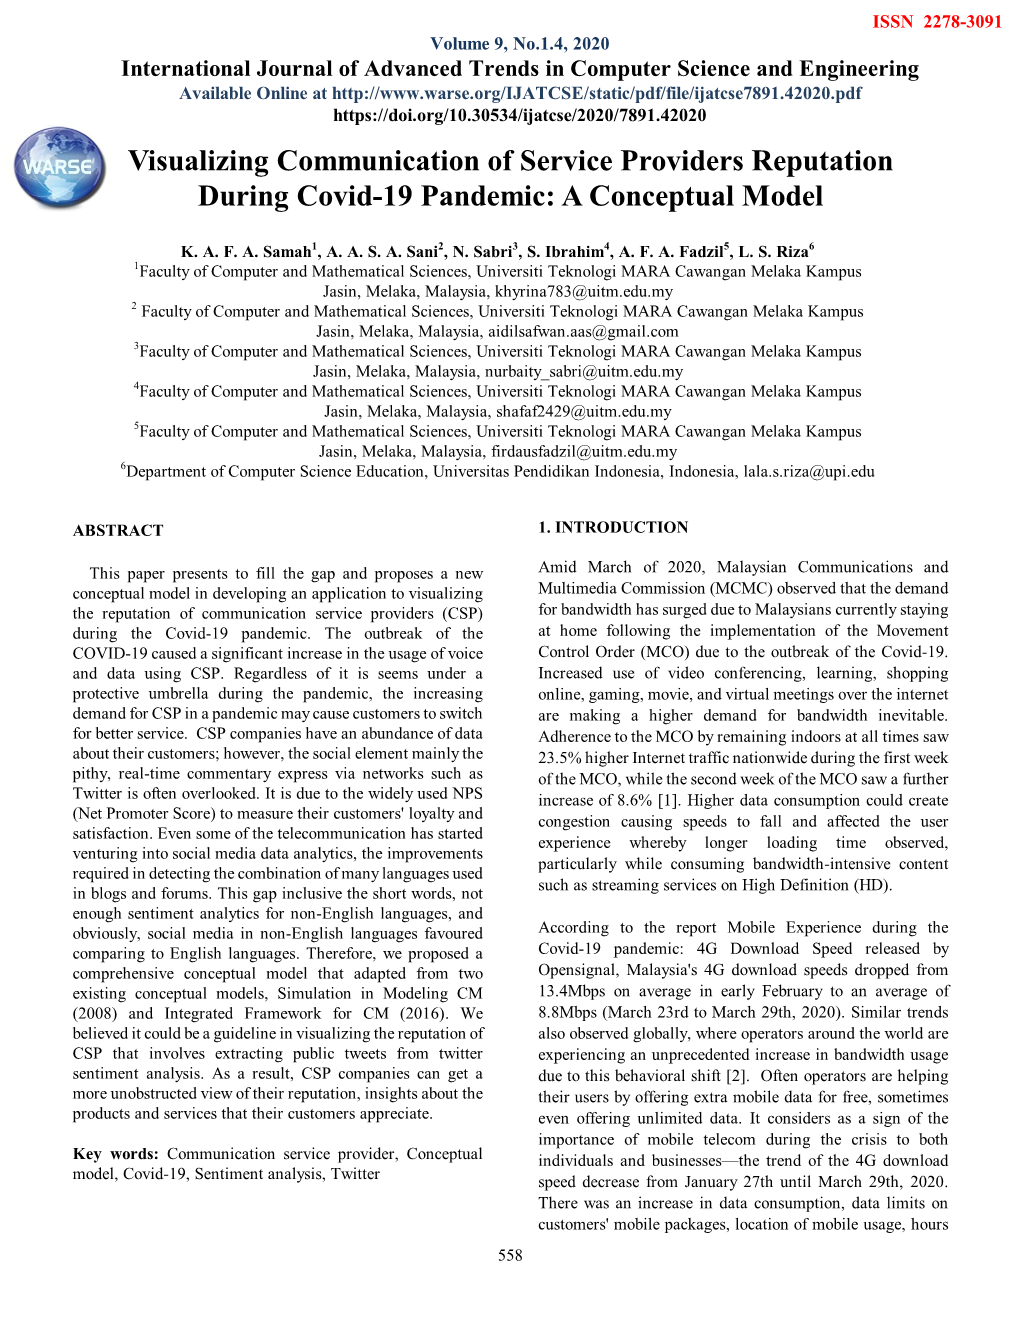 Visualizing Communication of Service Providers Reputation During Covid-19 Pandemic: a Conceptual Model